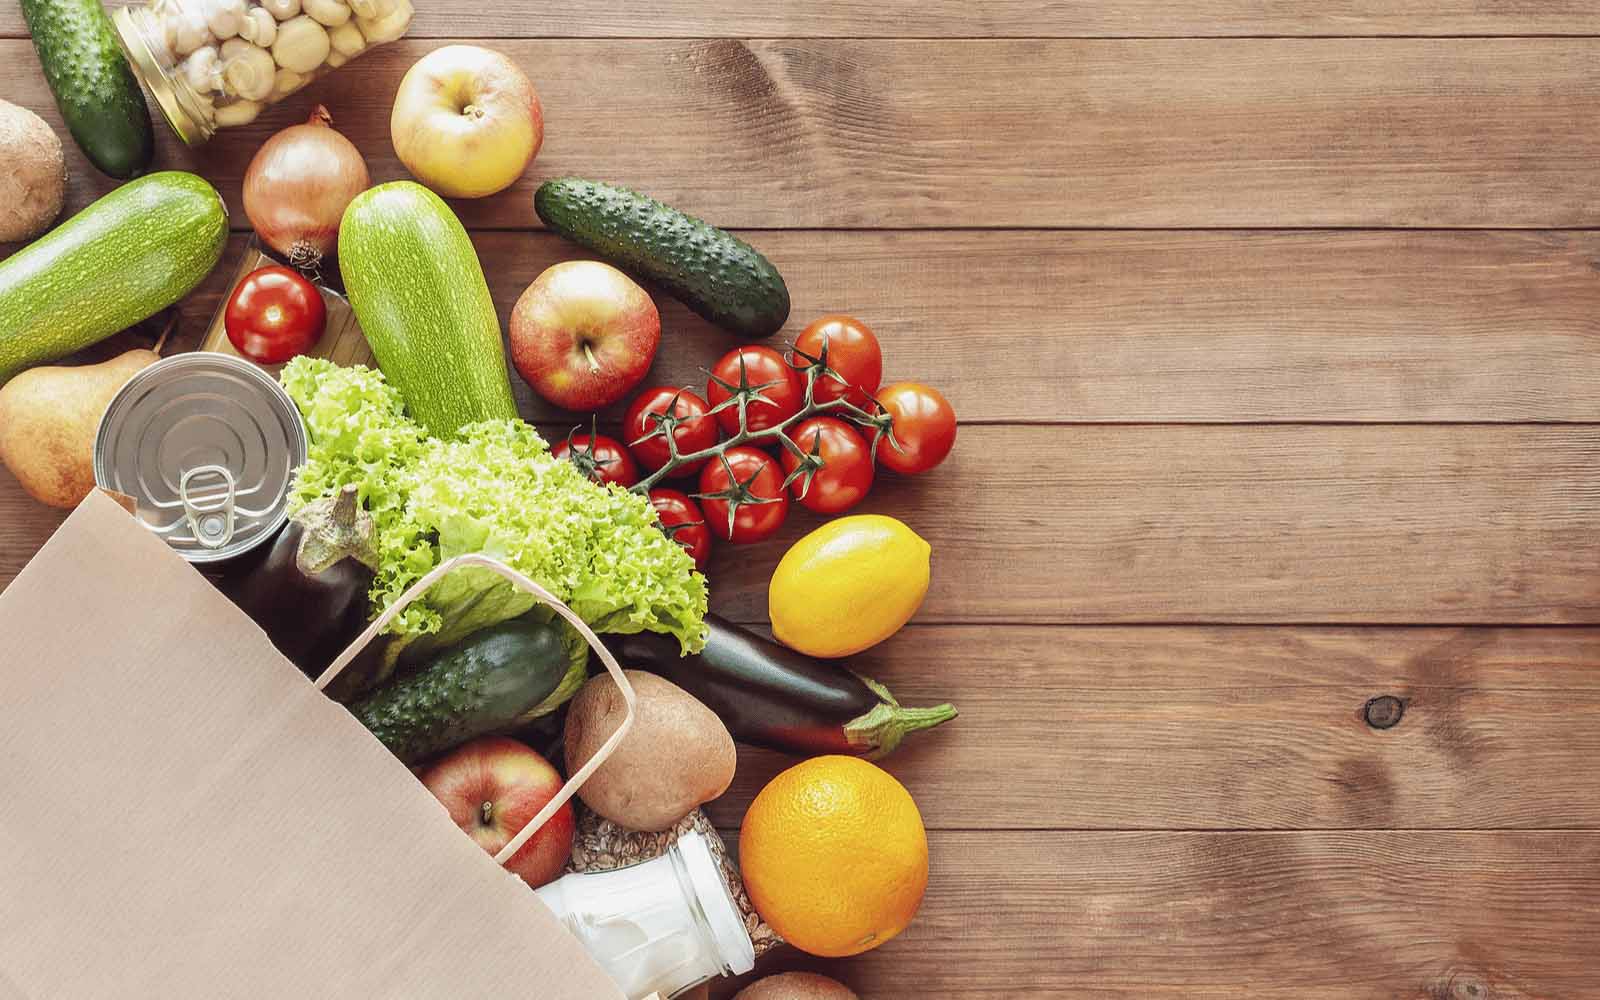 Making your groceries count - Nutracelle